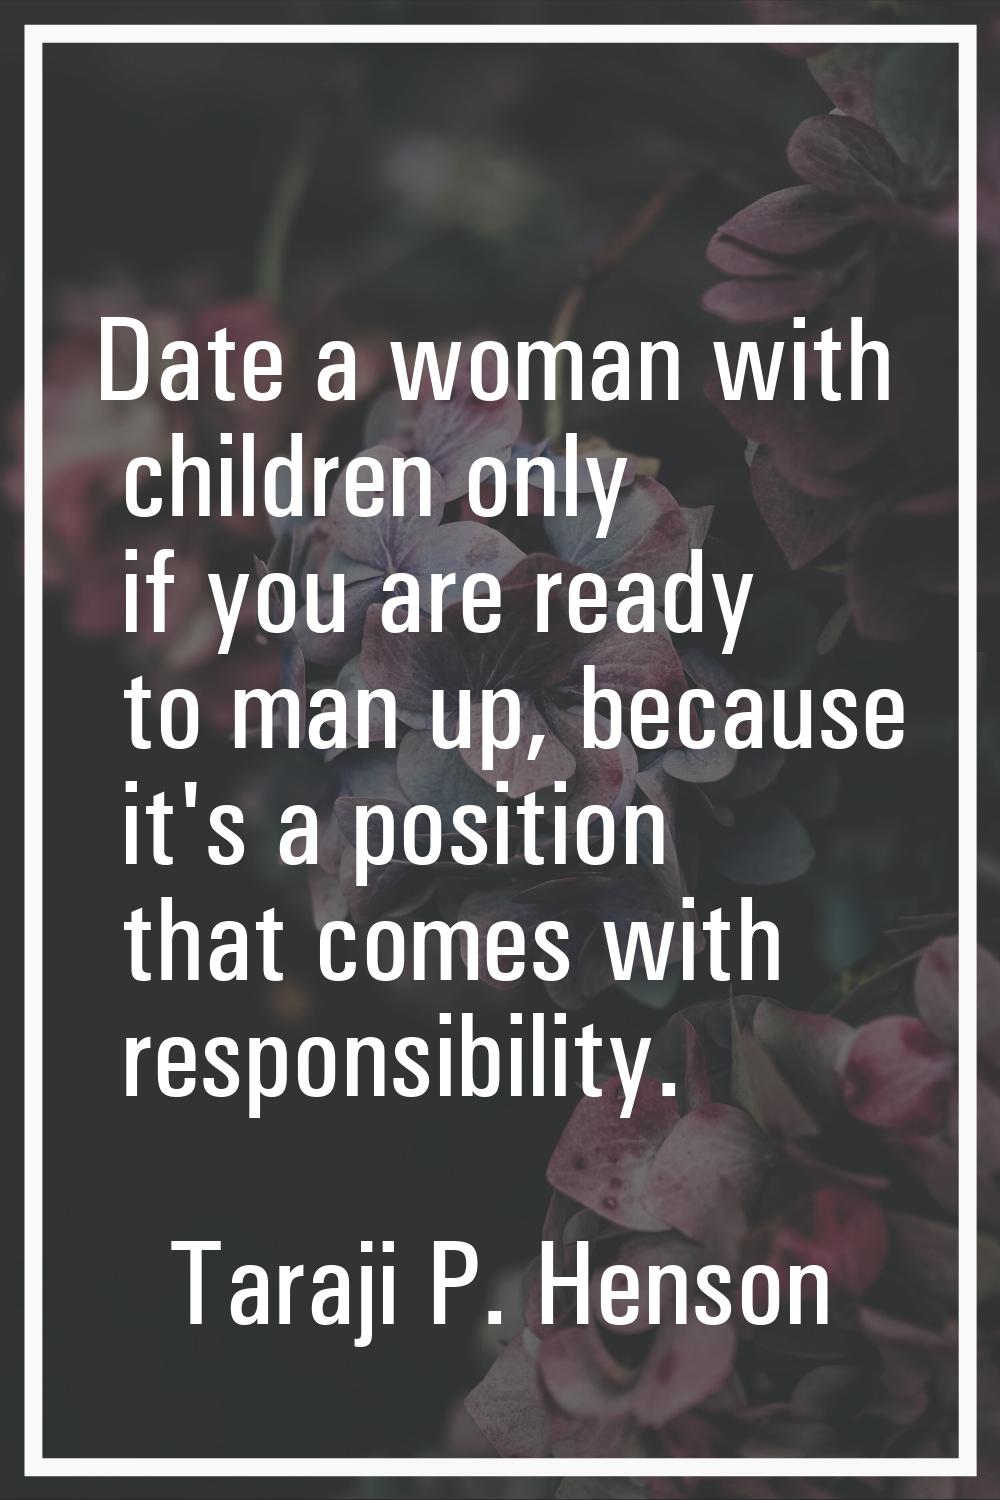 Date a woman with children only if you are ready to man up, because it's a position that comes with